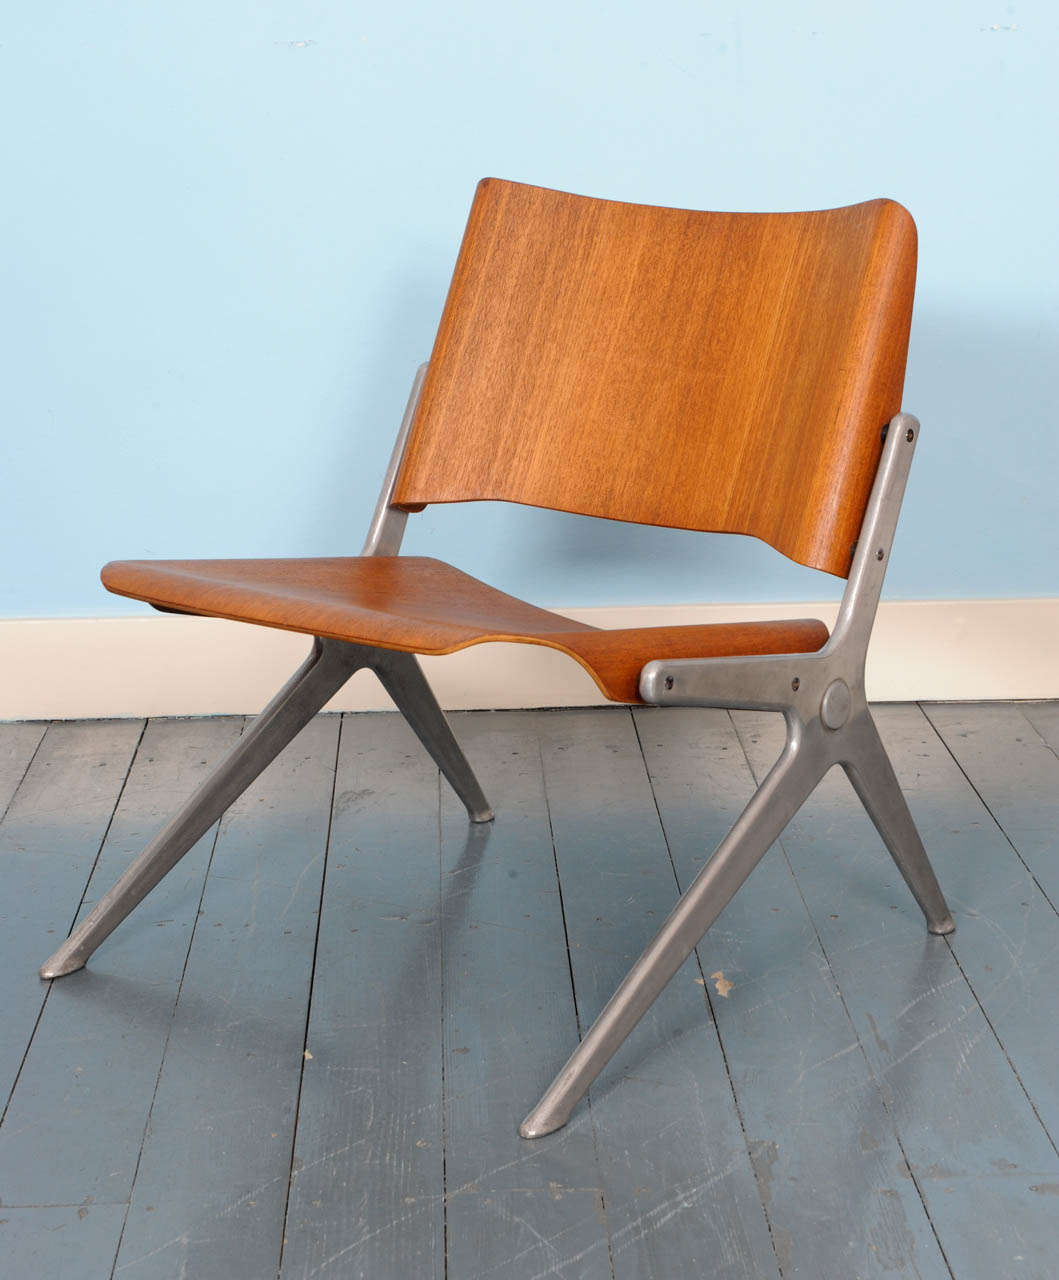 Rare Axis lounge chair by Robin Day for Hille Furniture.
This 1966 low chair combines injection moulded aluminum with bent plywood.
Most Axis chair were executed with upholstery, this version in teak faced plywood is very hard to find.
The Axis